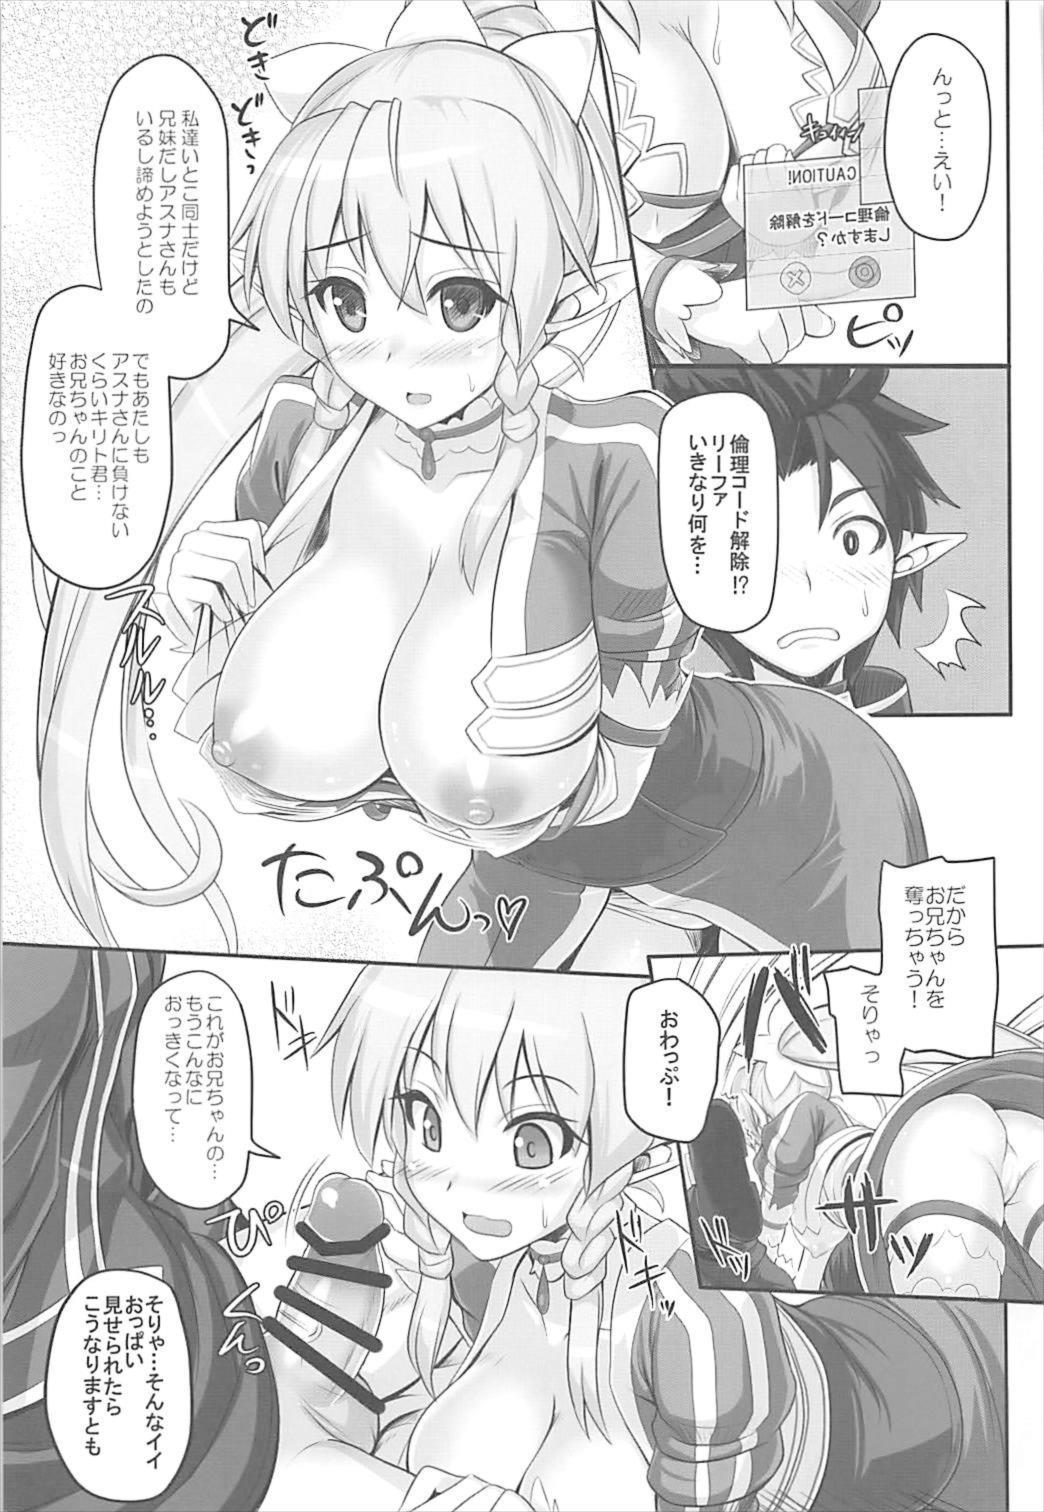 Rubbing Sister Affection On&Off SAO Soushuuhen - Sword art online Classic - Page 8